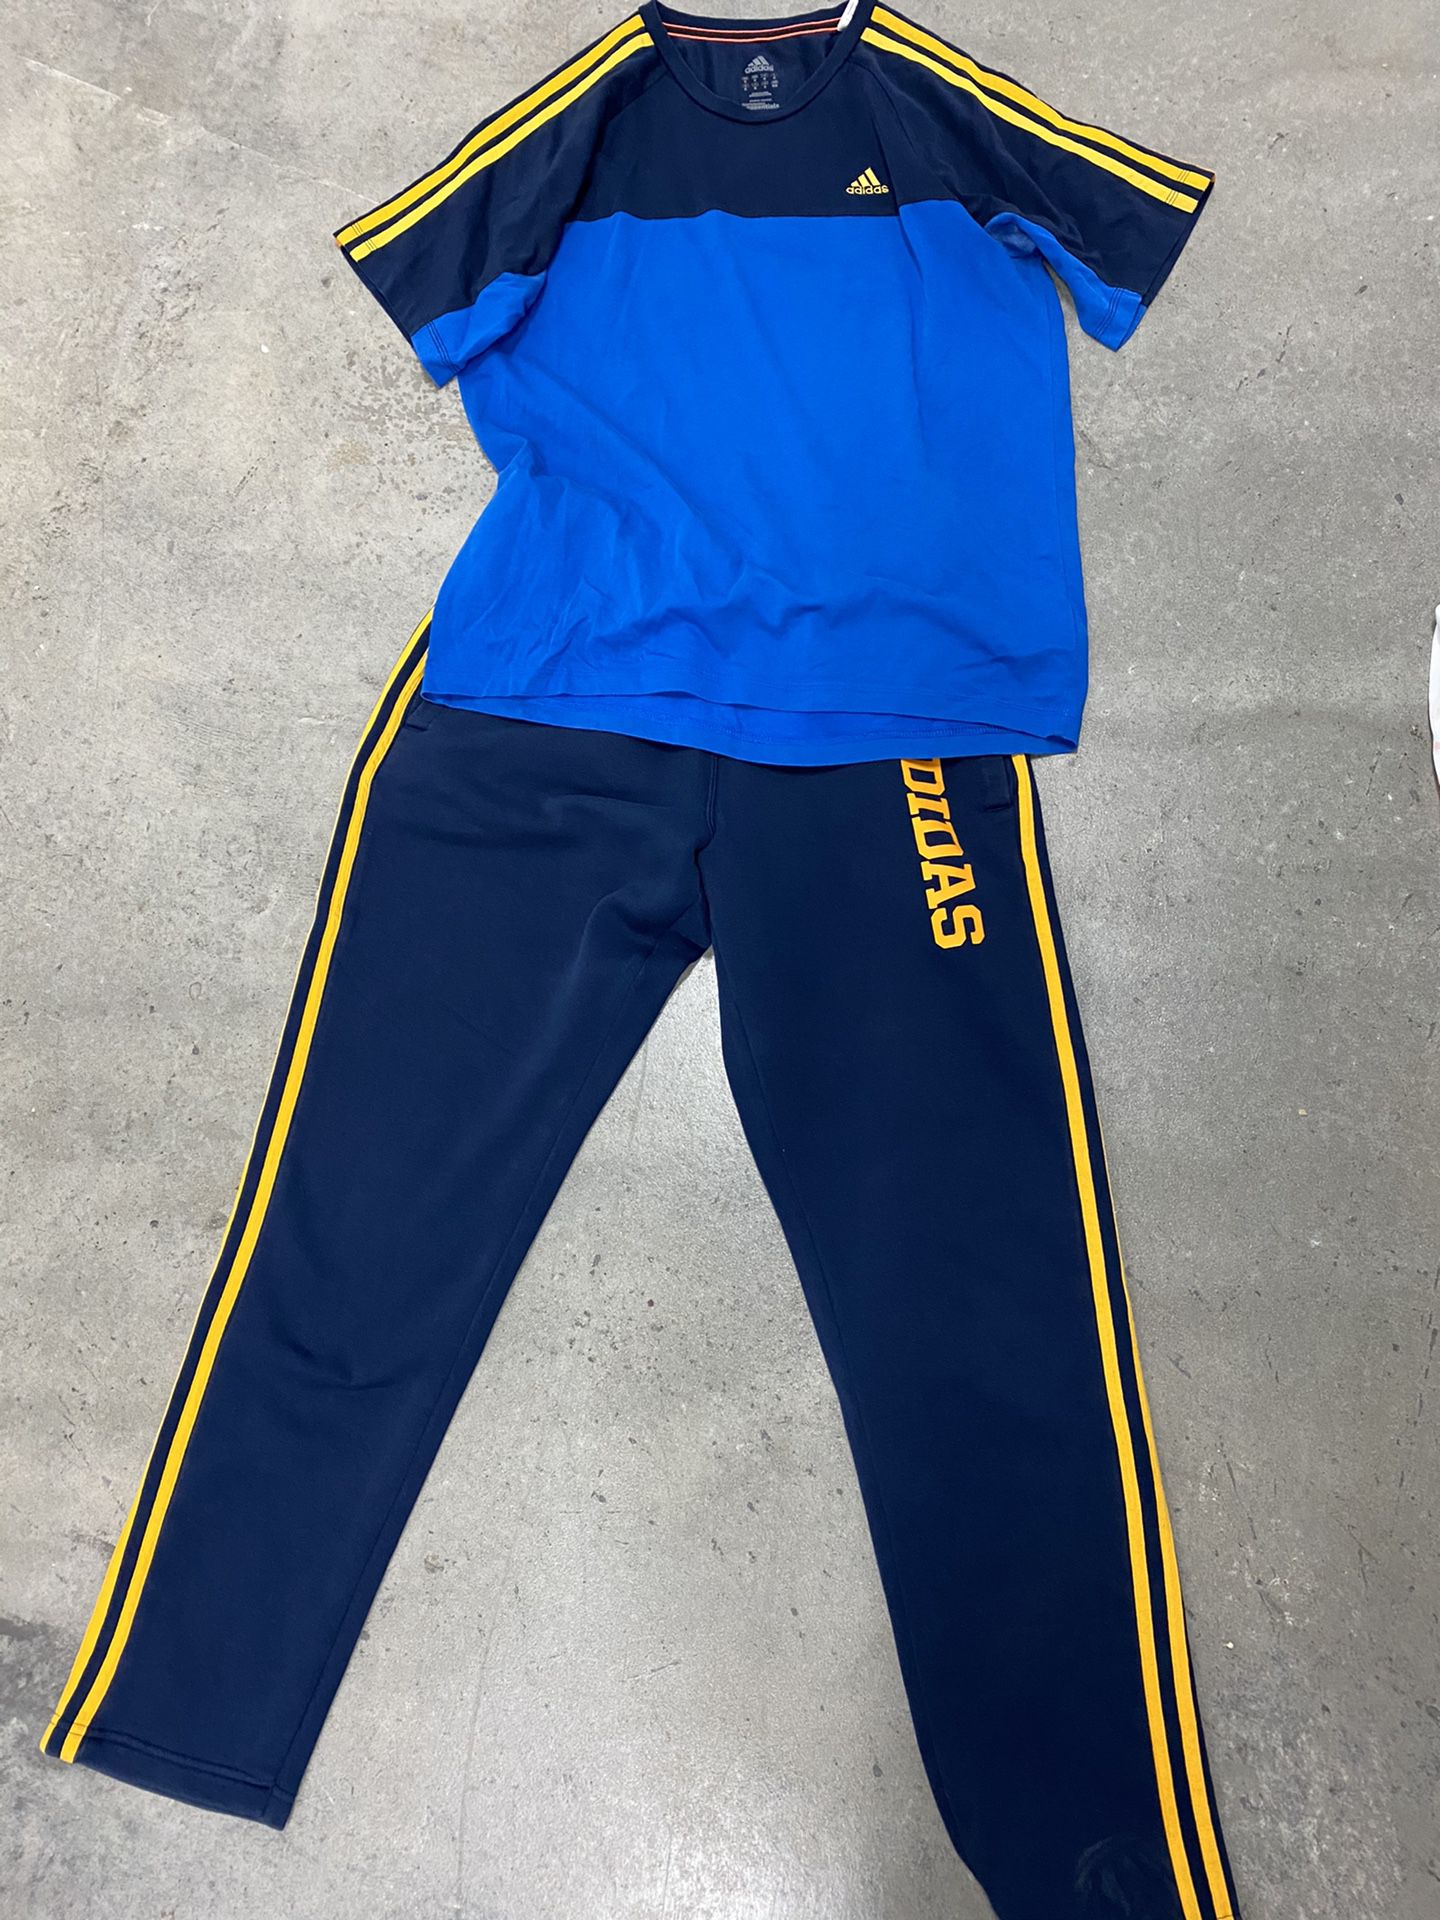 Adidas full outfit